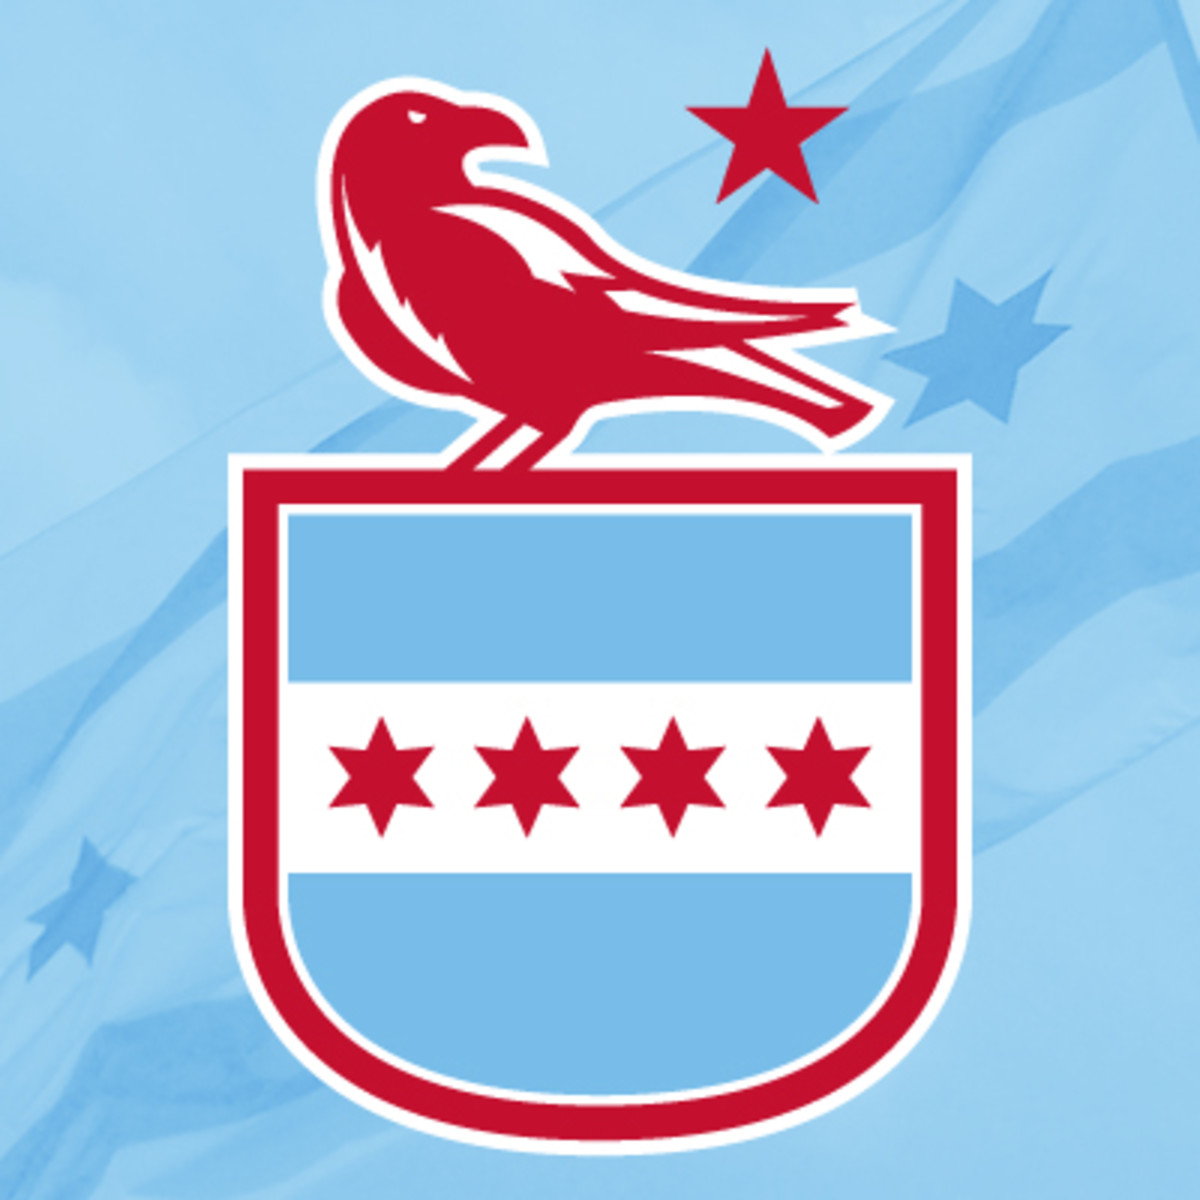 Designer Of Fictional Soccer Team Logos Gives Artsy New Meaning To